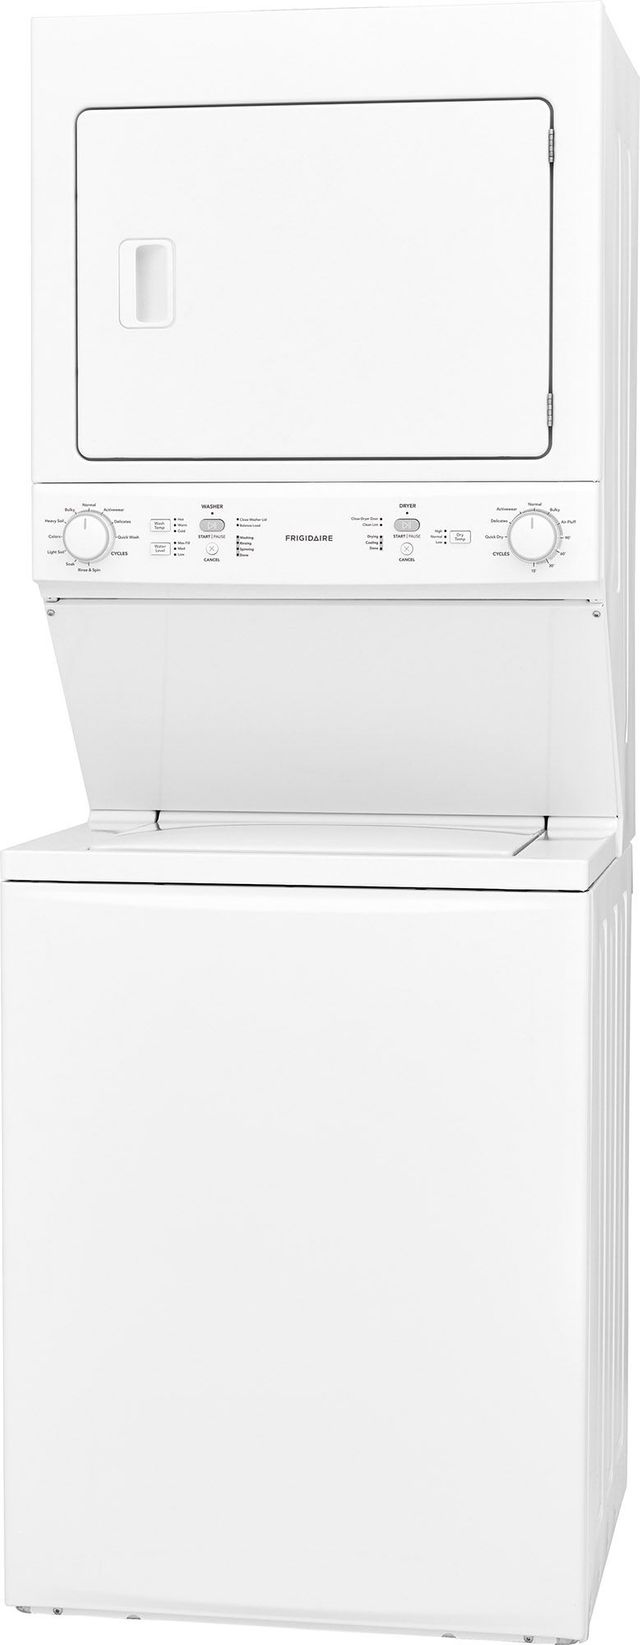 Frigidaire® 3.9 Cu. Ft. Washer, 5.5 cu. Ft. Dryer White Stack Laundry 6